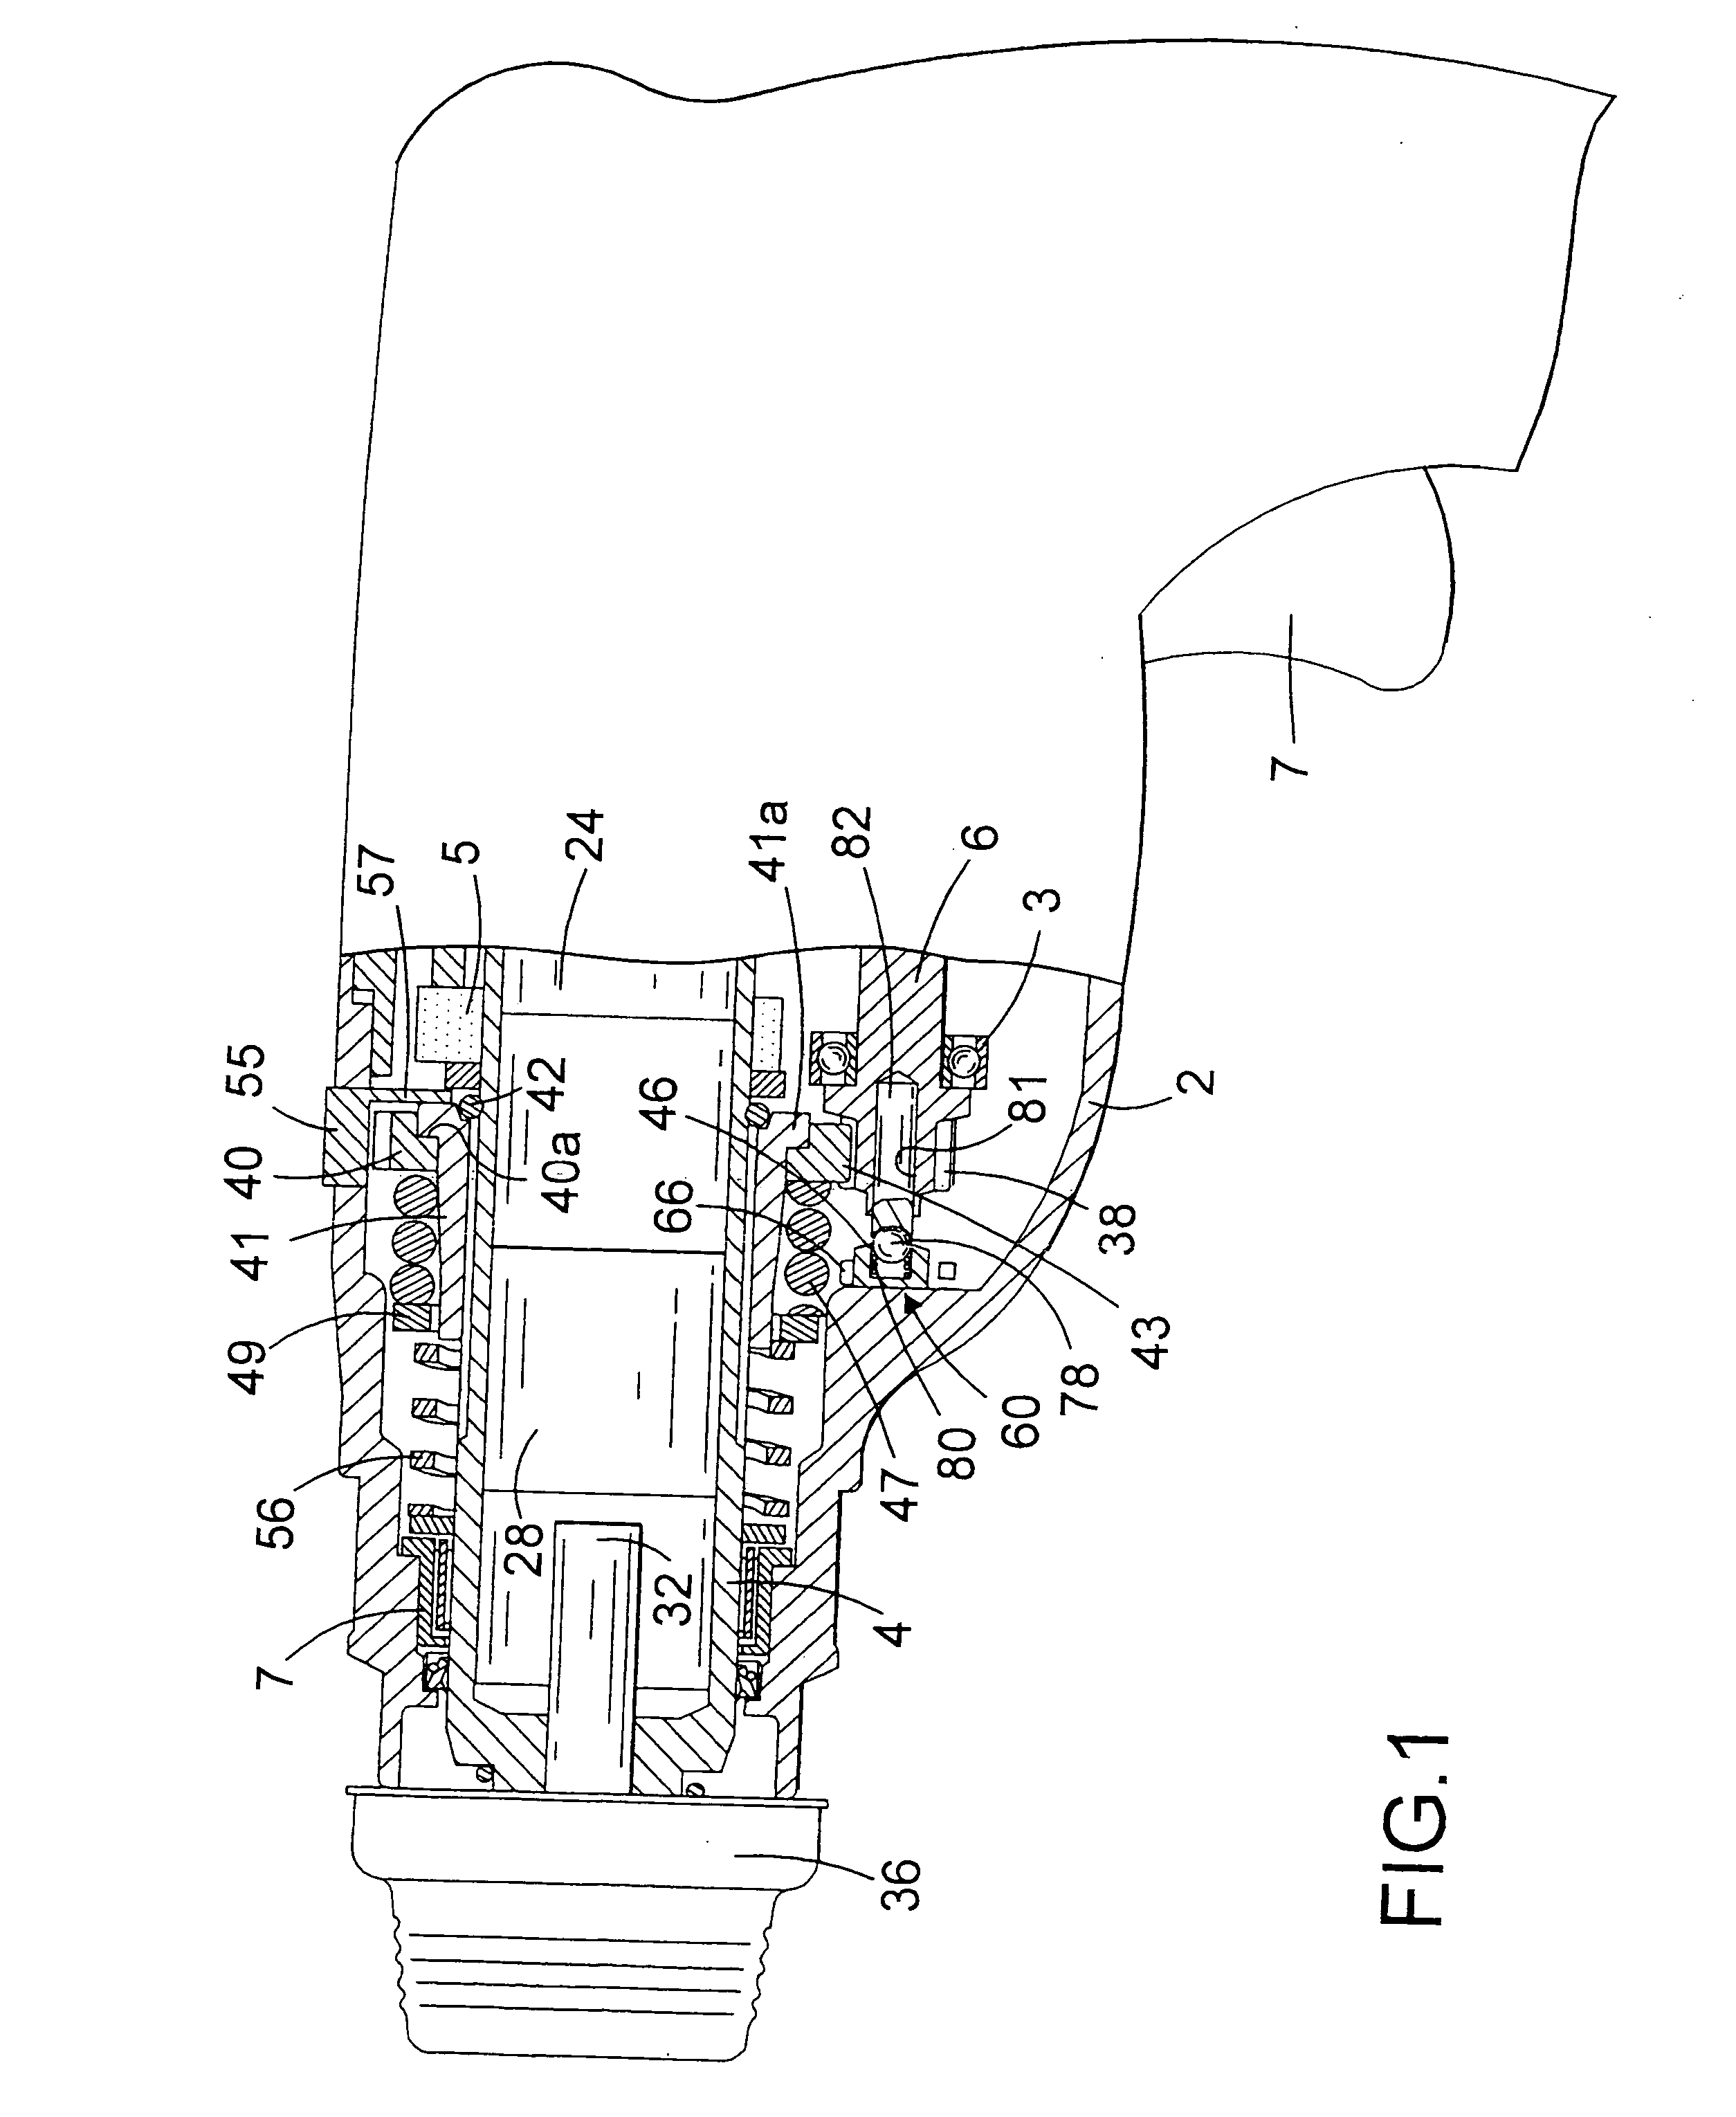 Clutch for rotary power tool and rotary power tool incorporating such clutch